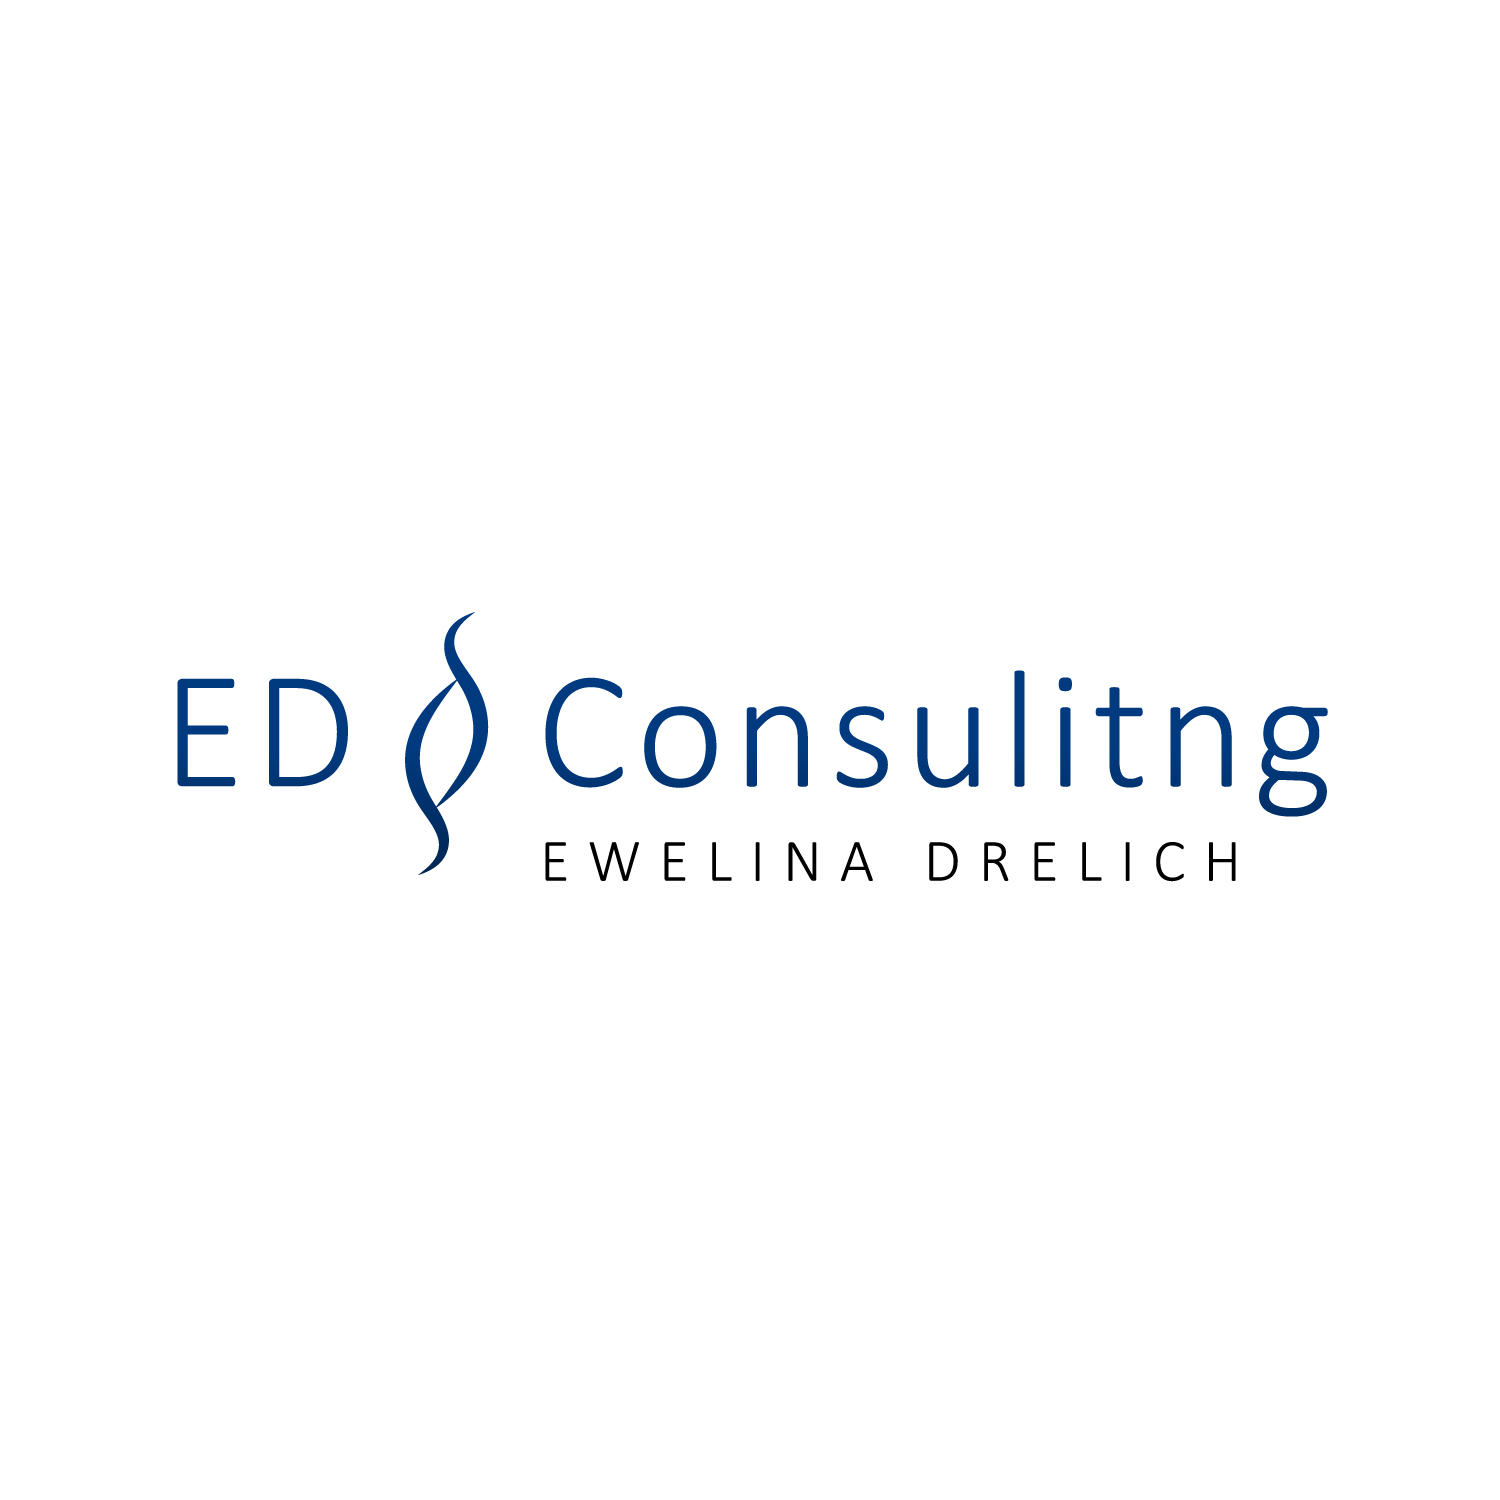 ed consulting